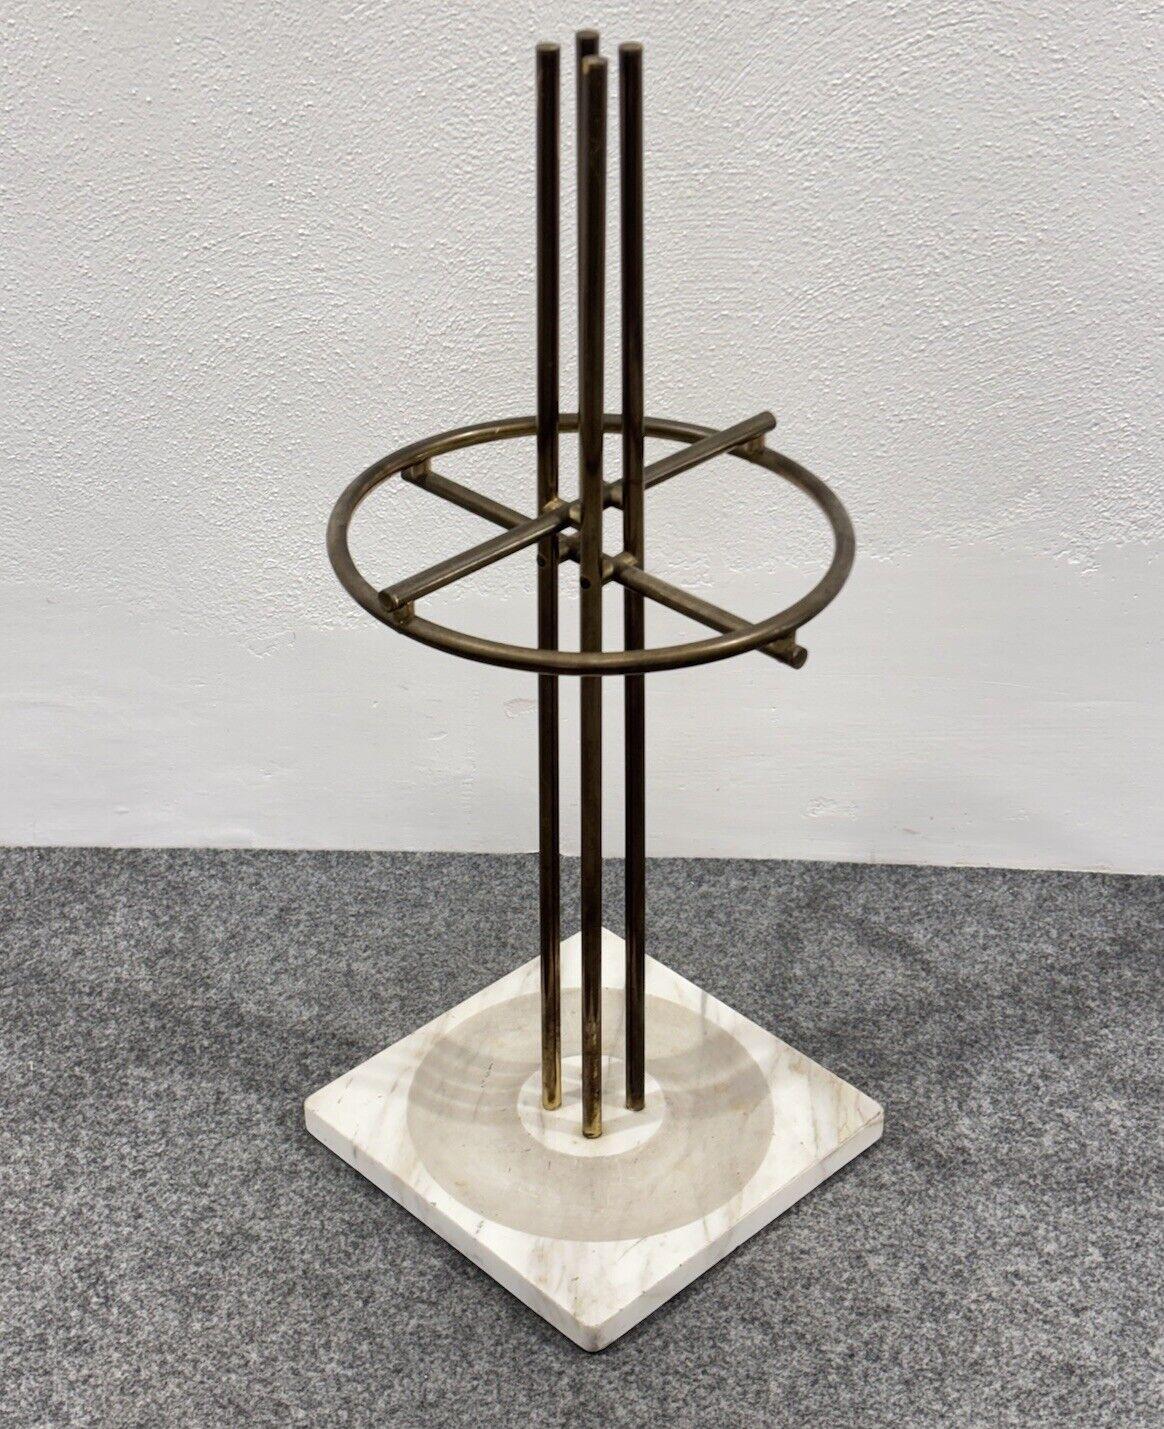 Renato Zevi Marble And Brass Umbrella Stand Modern Design.

The item is in excellent conservative condition, there are no cosmetic or structural defects to report. Only slight and obvious signs of time . (Please see photos)

Height 80 cm

Diameter